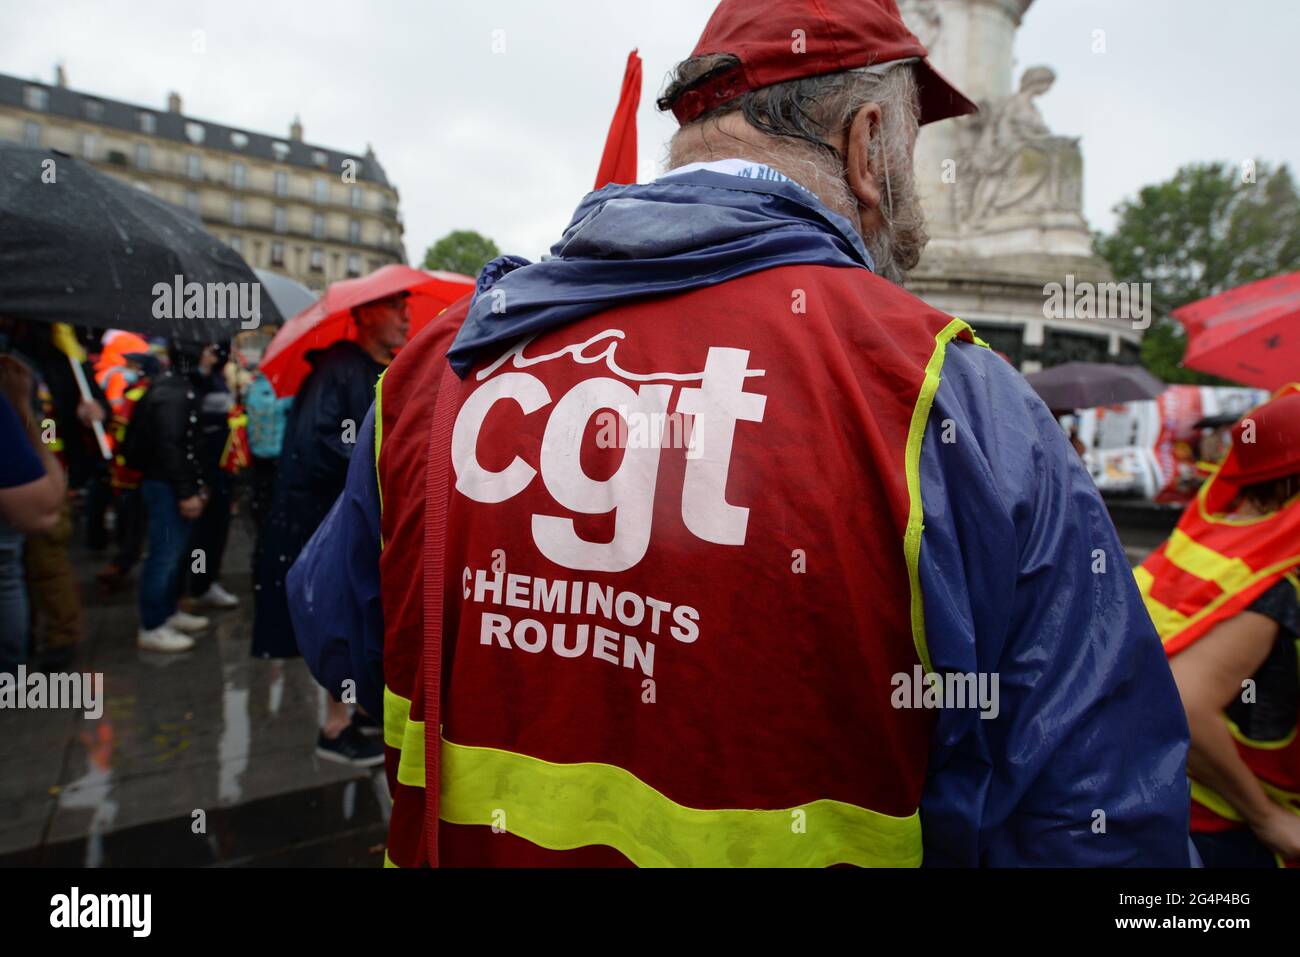 Paris demo for a public energy service.  Hundreds of demonstrators braved the rain from the Place de la Nation, to say NO to the 'Hercule' project Stock Photo